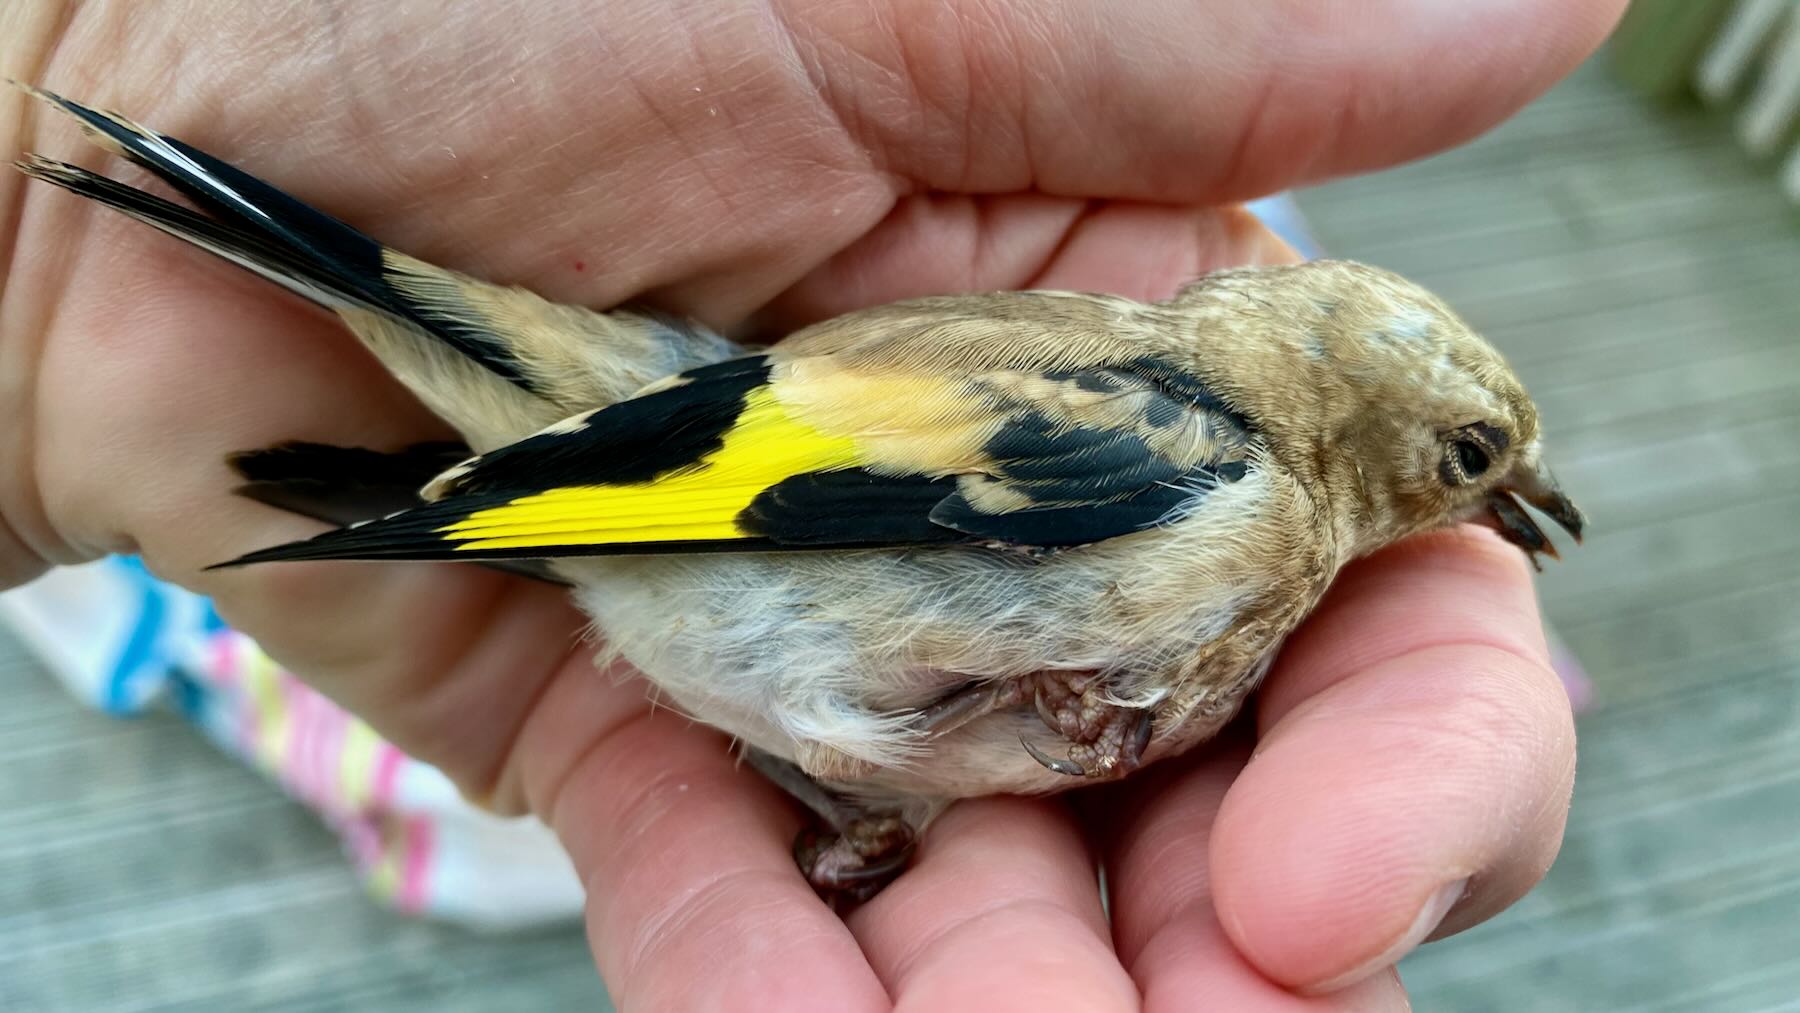 Small stunned bird in hand, with bright yellow wingbars. 